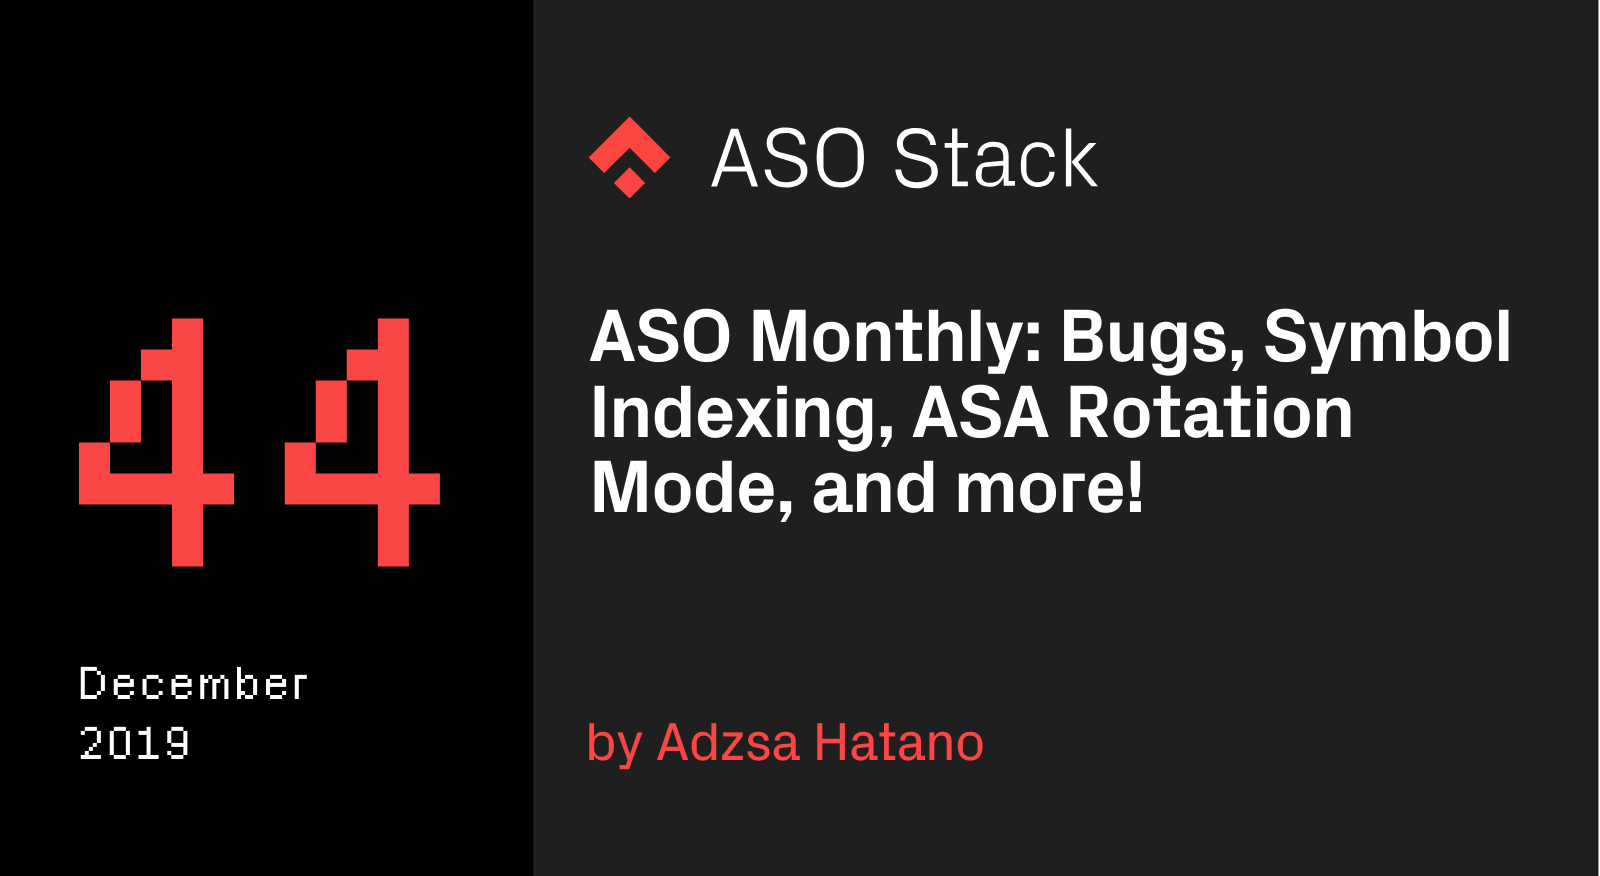 ASO Monthly #44 December 2019- Bugs, Symbol Indexing, ASA Rotation Mode, and more